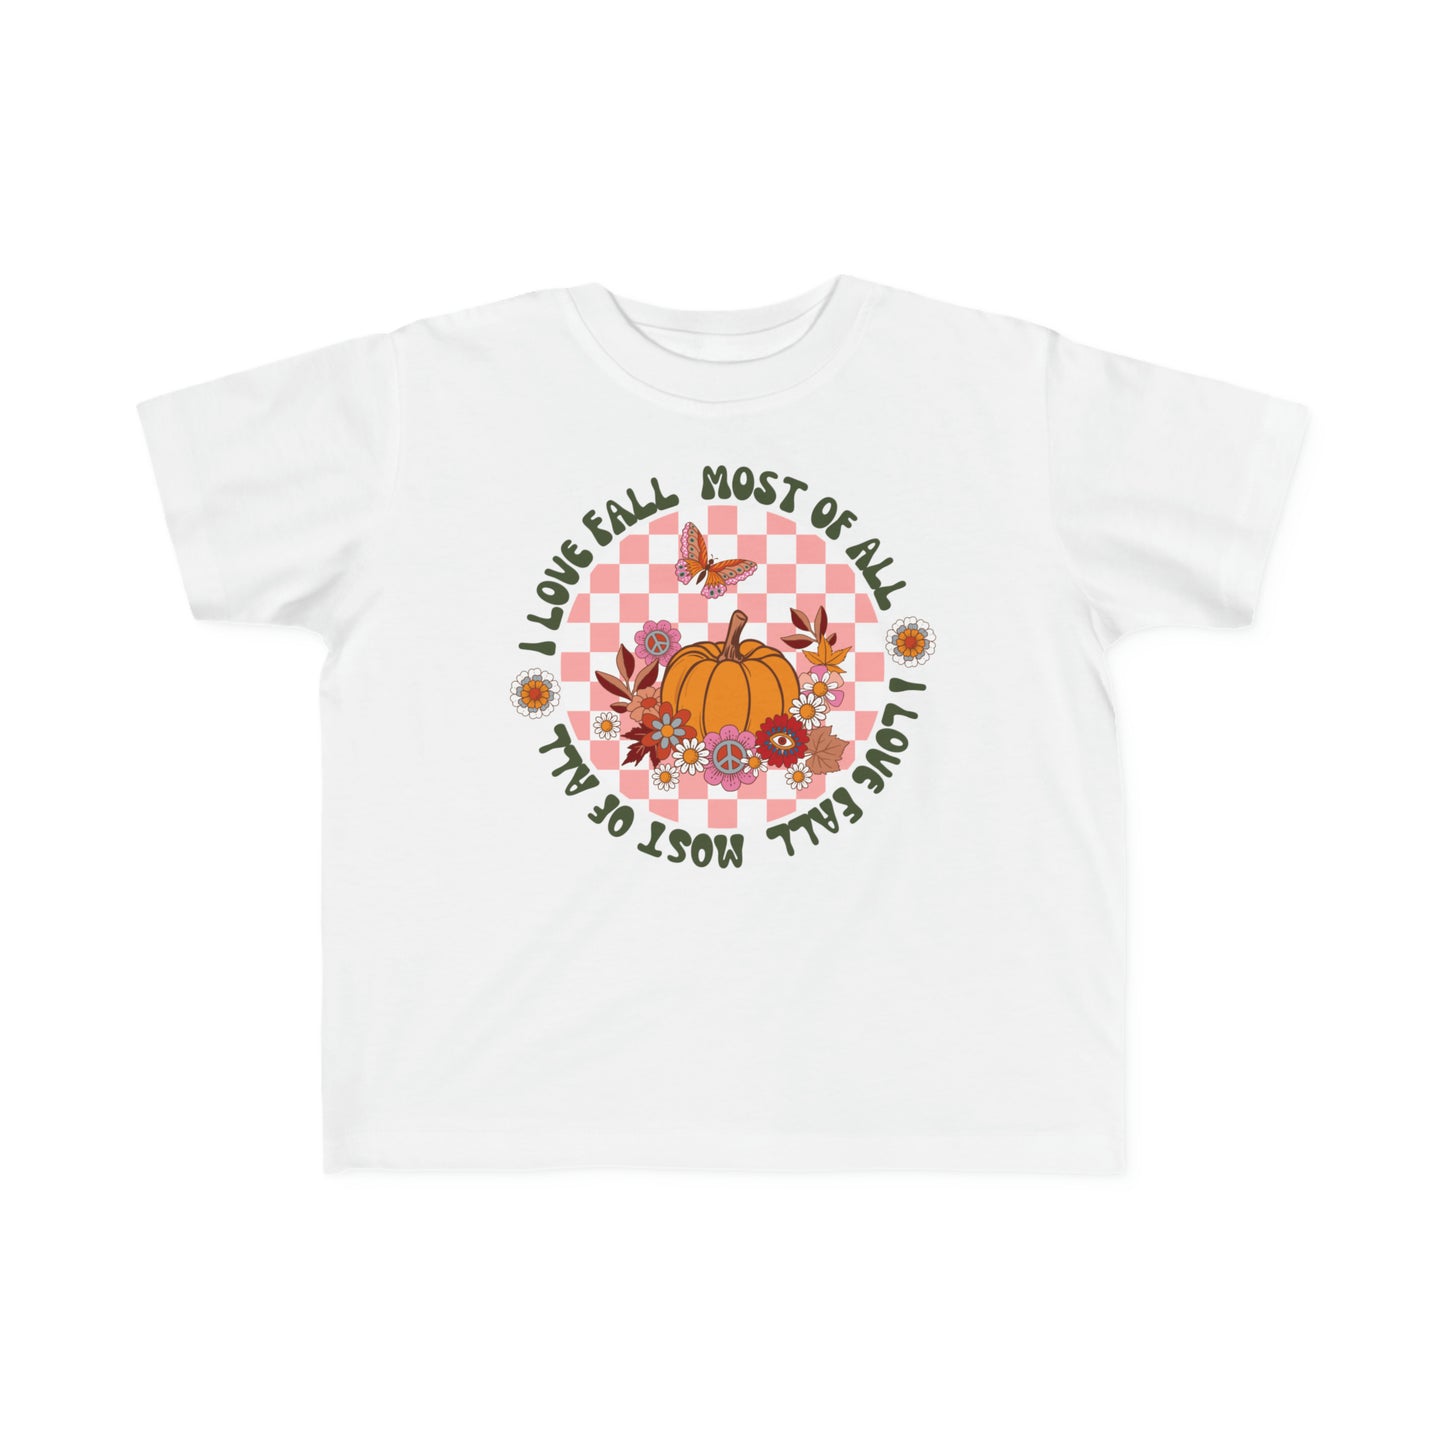 I Love Fall Most of All Peace  Toddler's Fine Jersey Tee